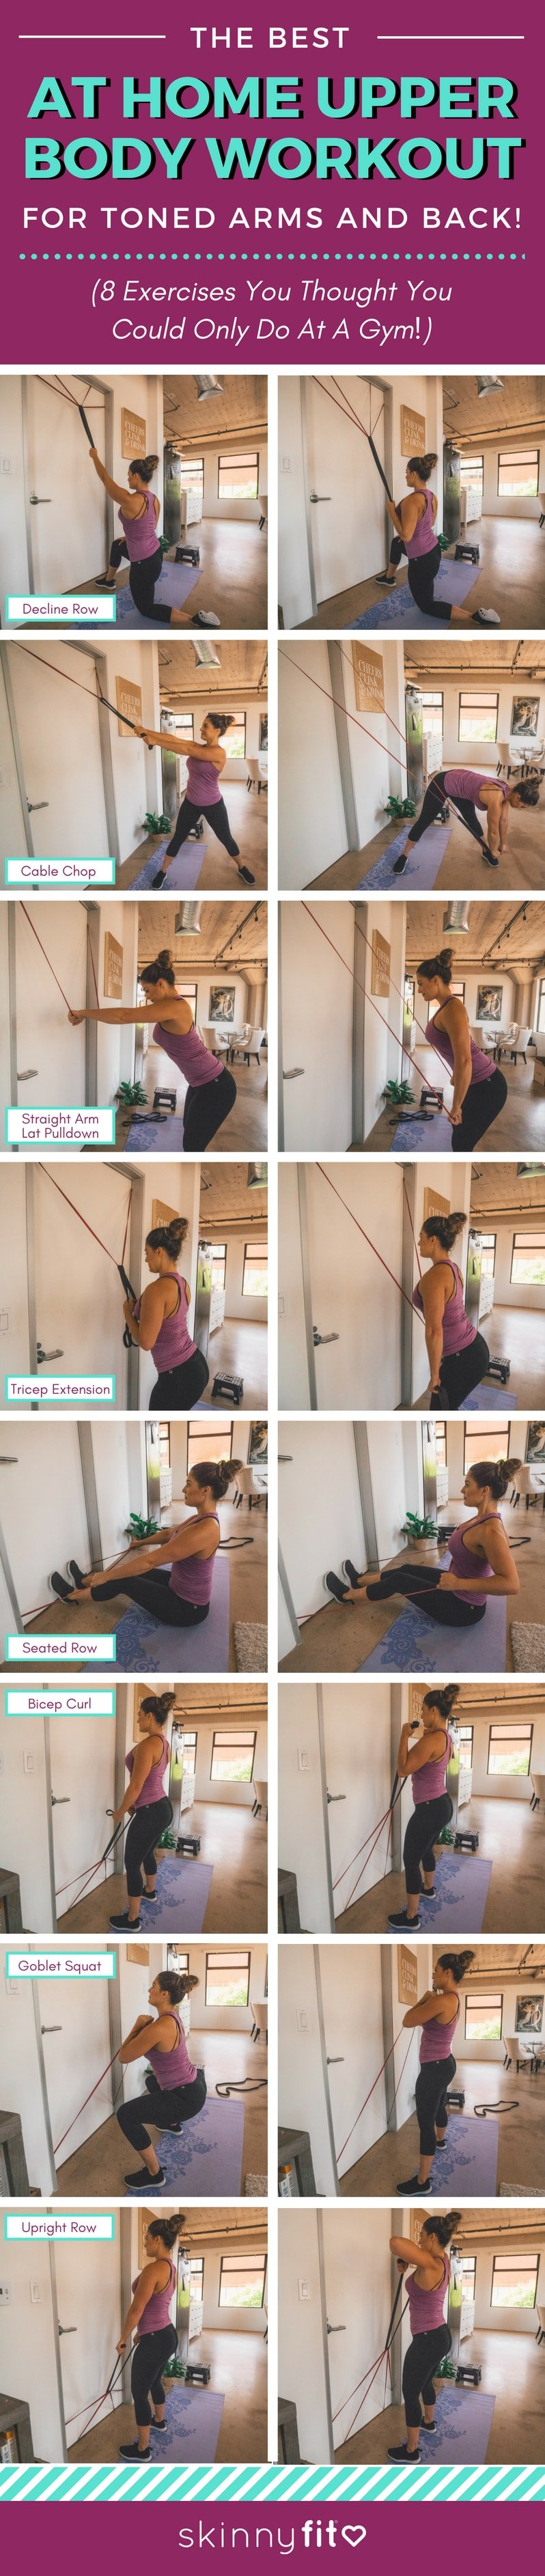 at home upper body workout upper body band workout